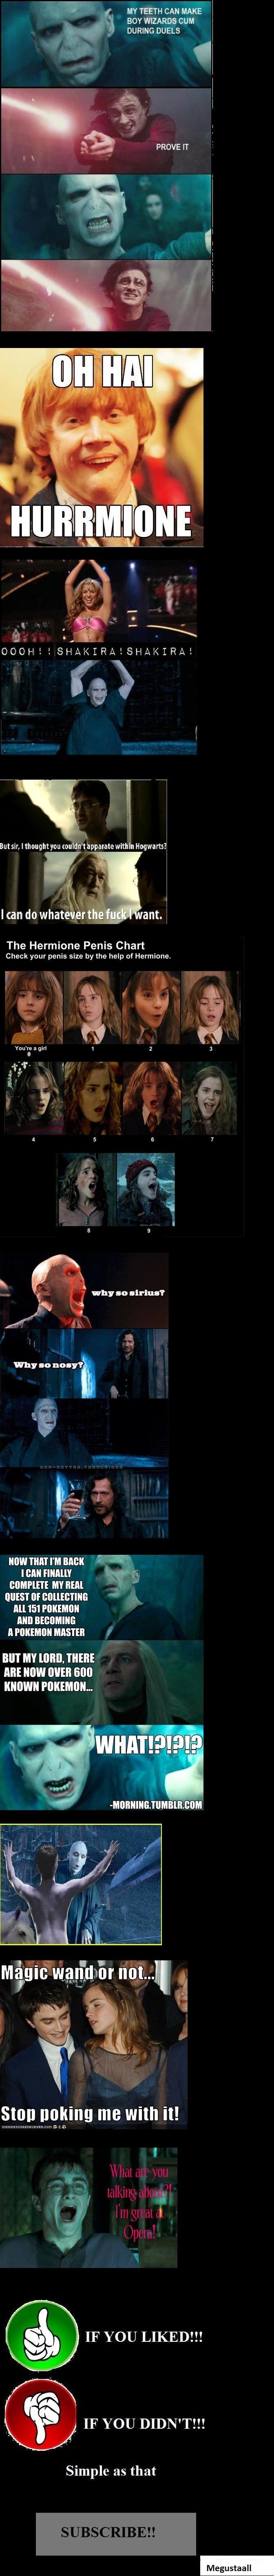 Harry Potter Compilation 1. 30 thumbs for the 2. part. f, MY TEETH CAN MAKE 1 BOY WIZARDS CUM DURING DUELS l PROVE IT But sir, I you apparate within Hogwarts? T